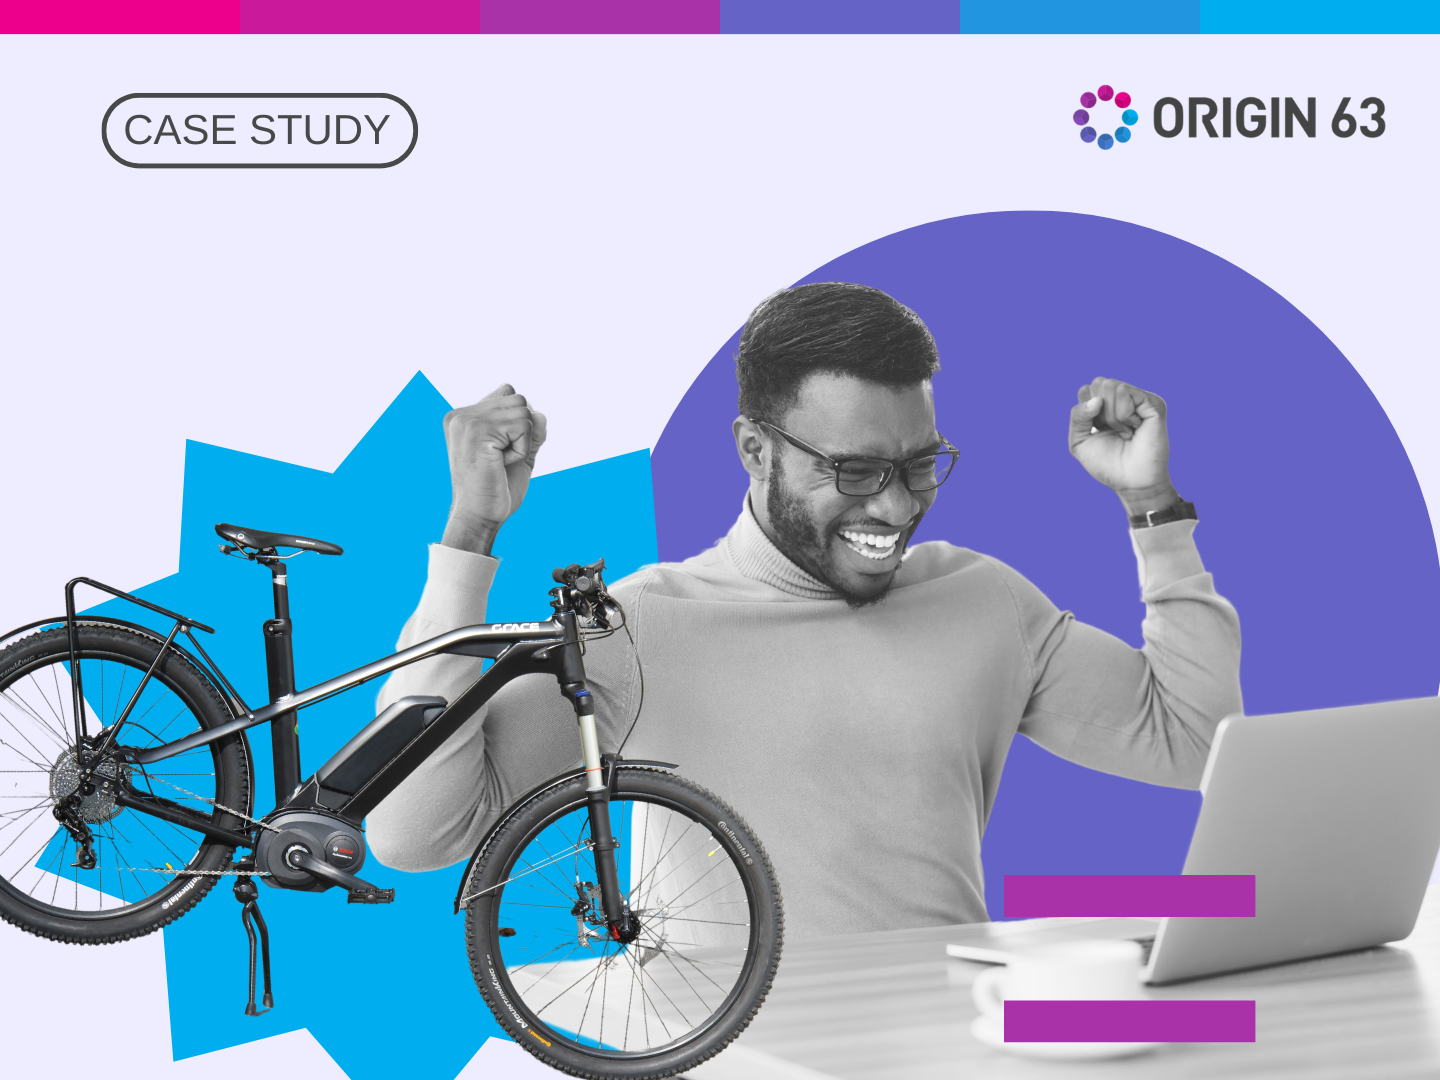 Onyx Motorbikes used HubSpot Sales & Service Hub to overcome challenges, streamline operations, and redefine micro-mobility for growth.